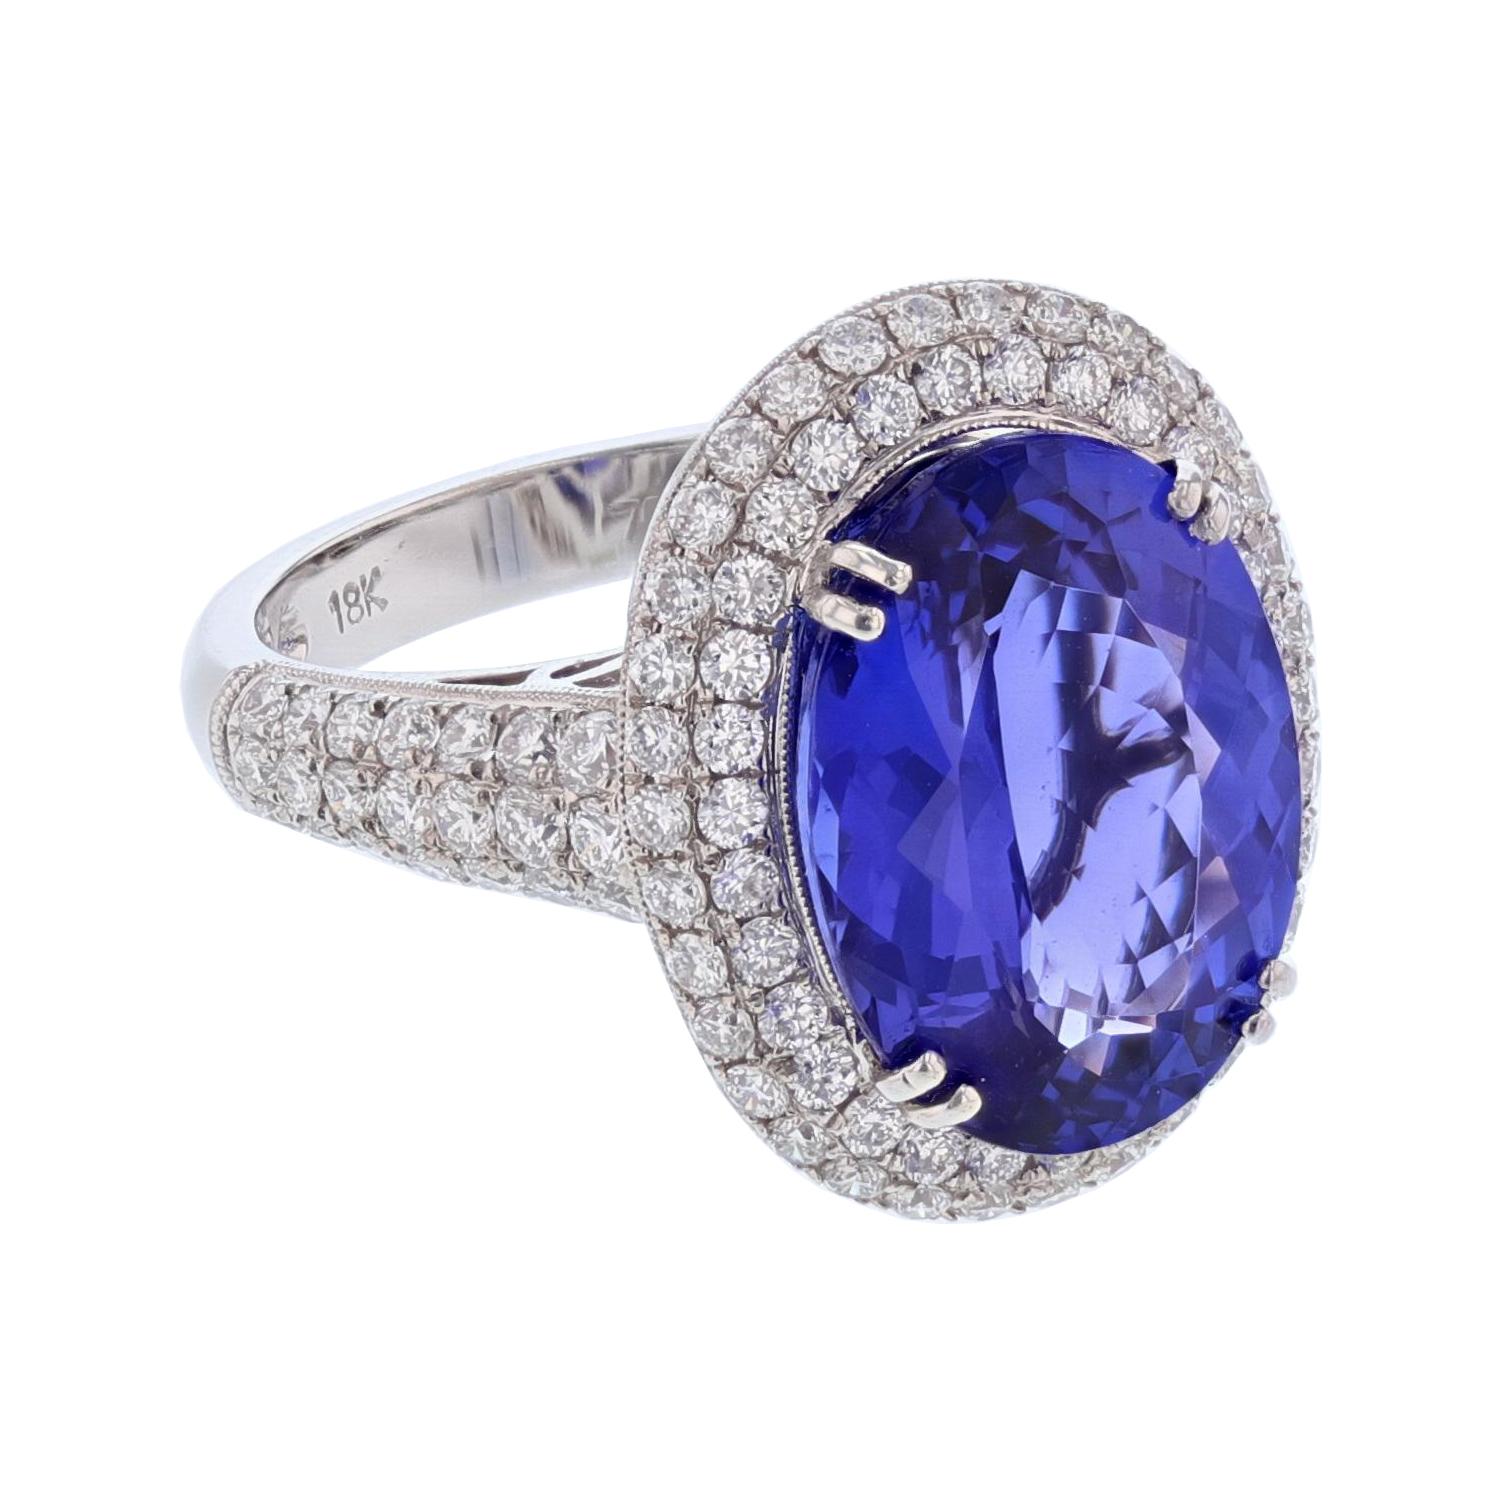 This ring is made in 18 karat white gold. The center stone is an oval cut Tanzanite weighing 7.62 carats and is prong set. The mounting features 106 round cut, pave set diamonds weighing 1.52 carats.